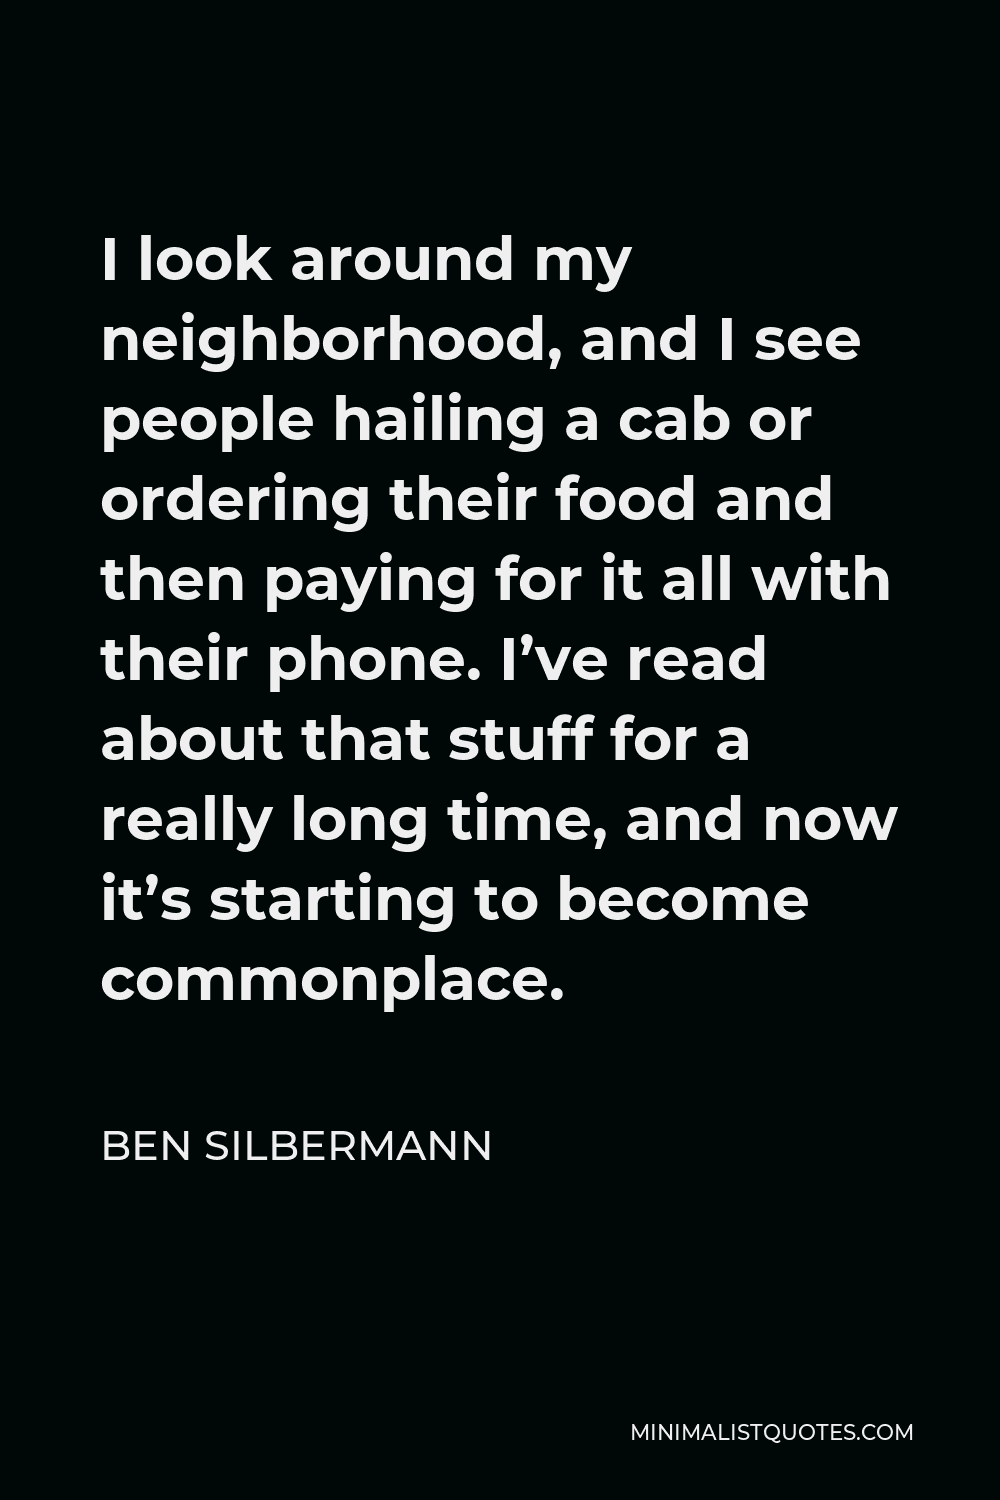 Ben Silbermann Quote - I look around my neighborhood, and I see people hailing a cab or ordering their food and then paying for it all with their phone. I’ve read about that stuff for a really long time, and now it’s starting to become commonplace.